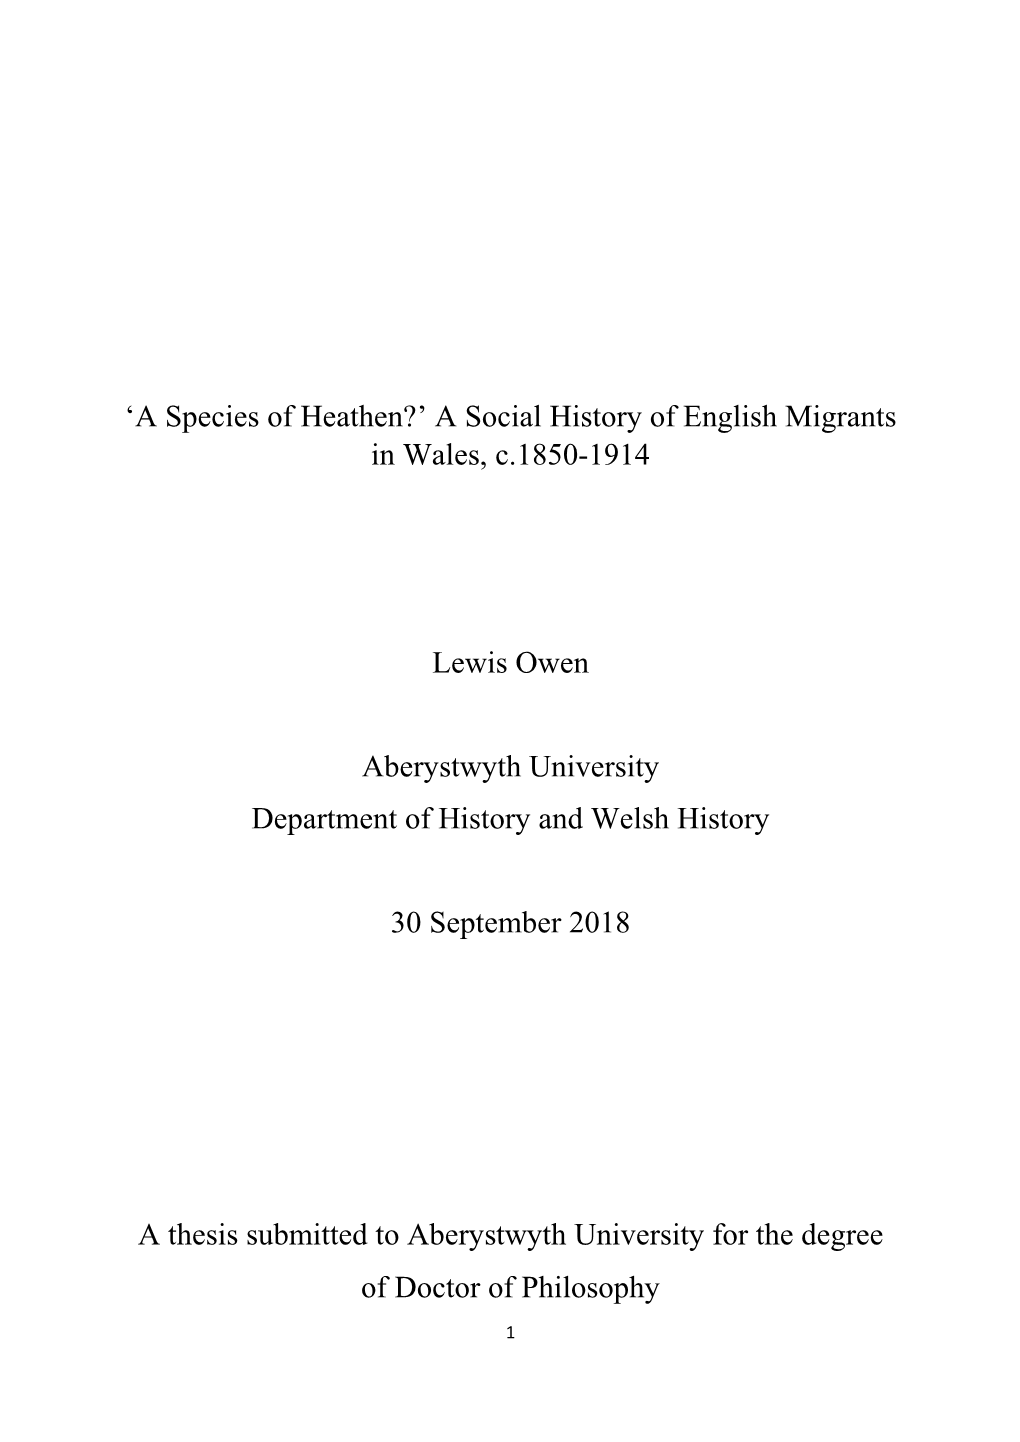 'A Species of Heathen?' a Social History of English Migrants in Wales, C.1850-1914 Lewis Owen Aberystwyth University Departm